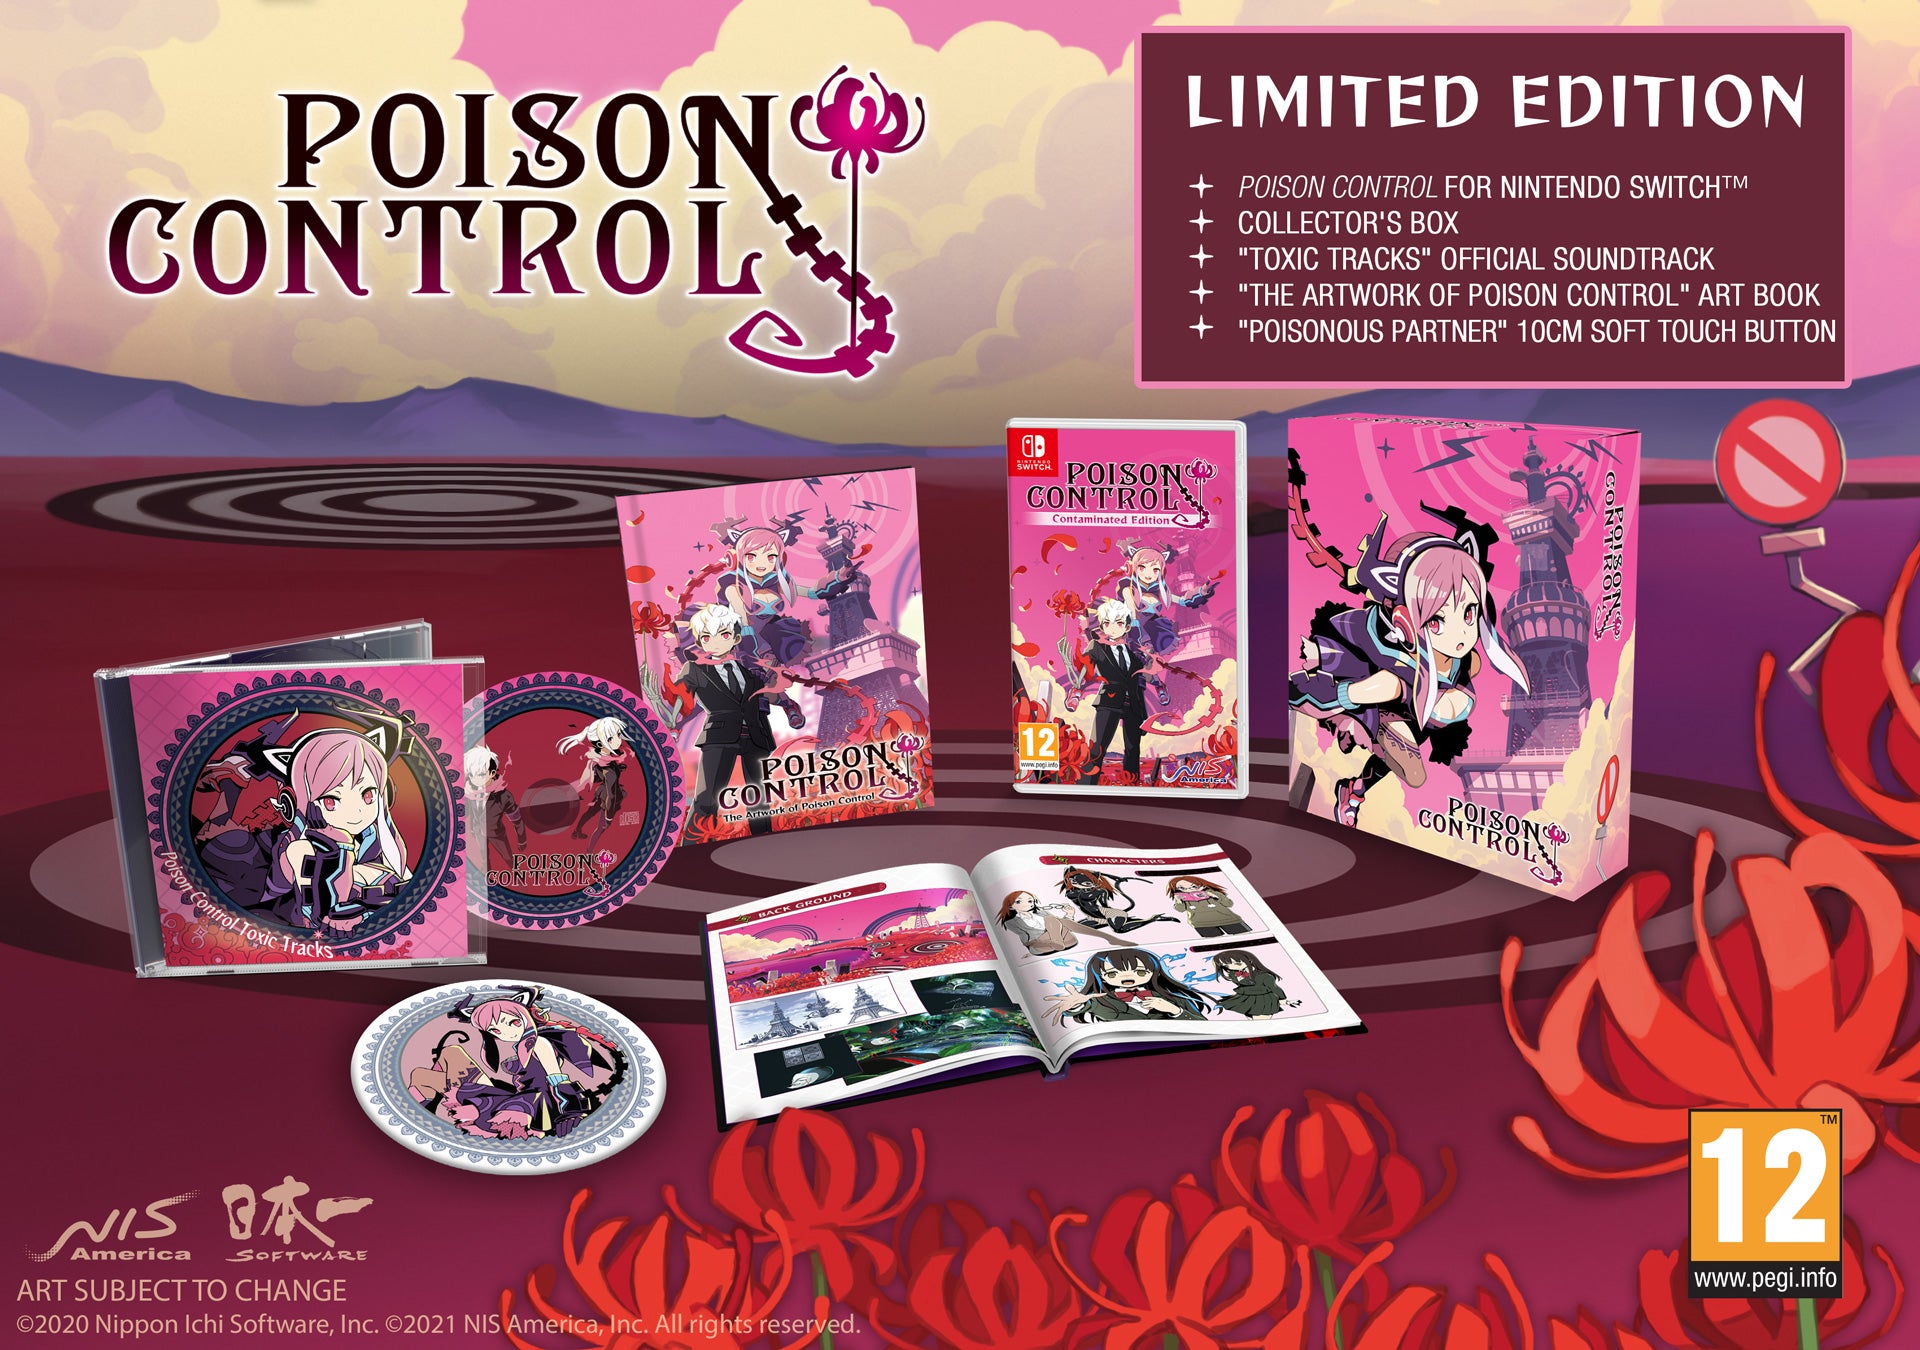 Poison Control - Limited Edition - Nintendo Switch™